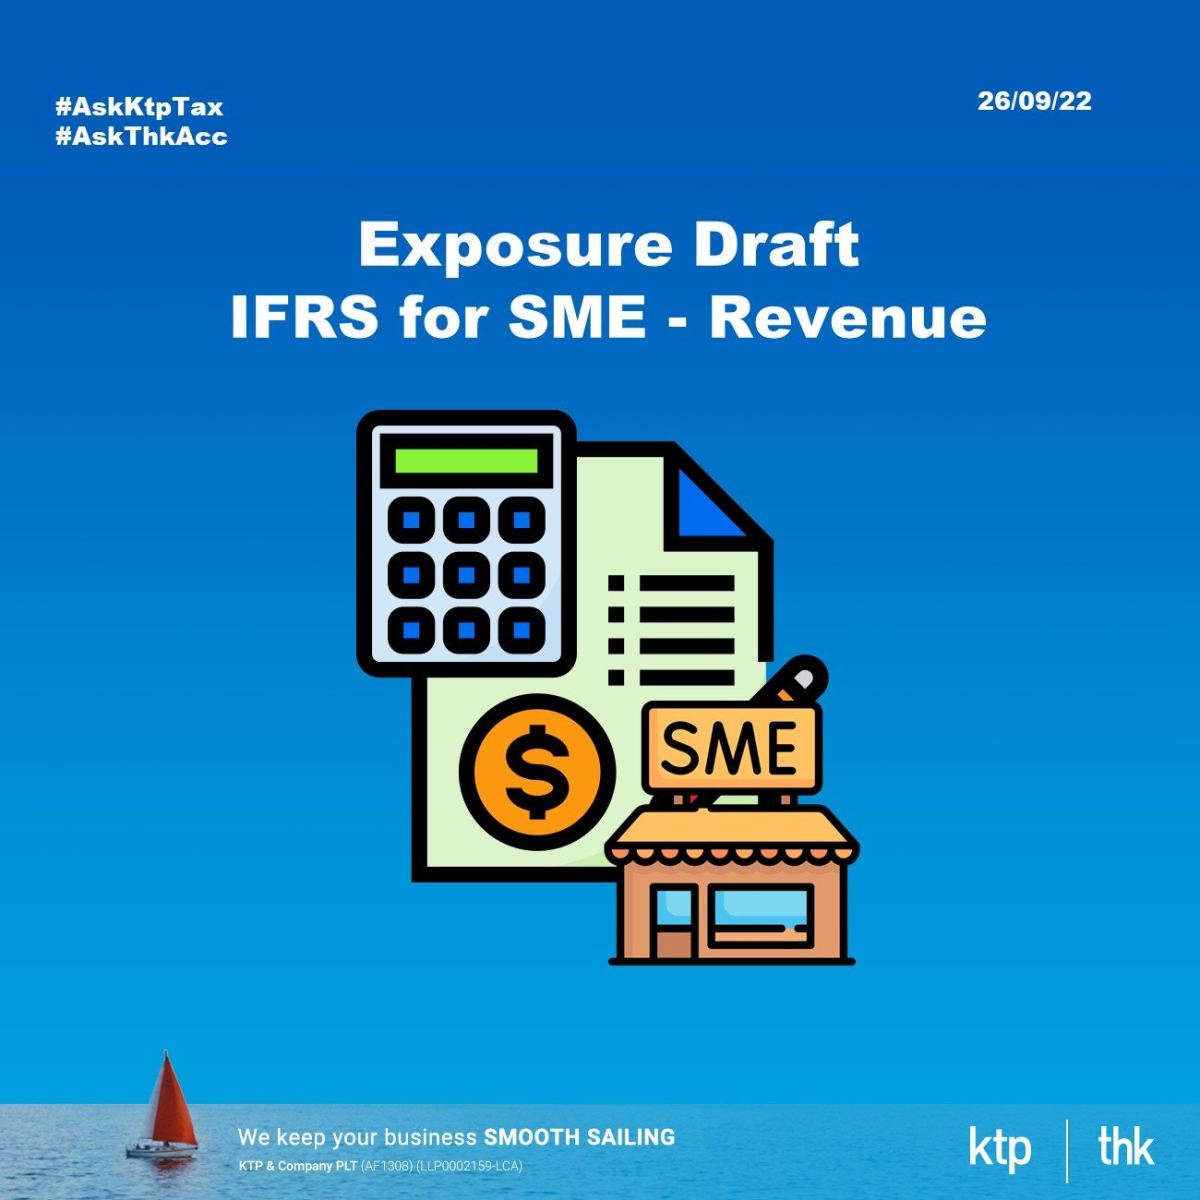 Exposure Draft on Section 23 Revenue of the IFRS for SMEs